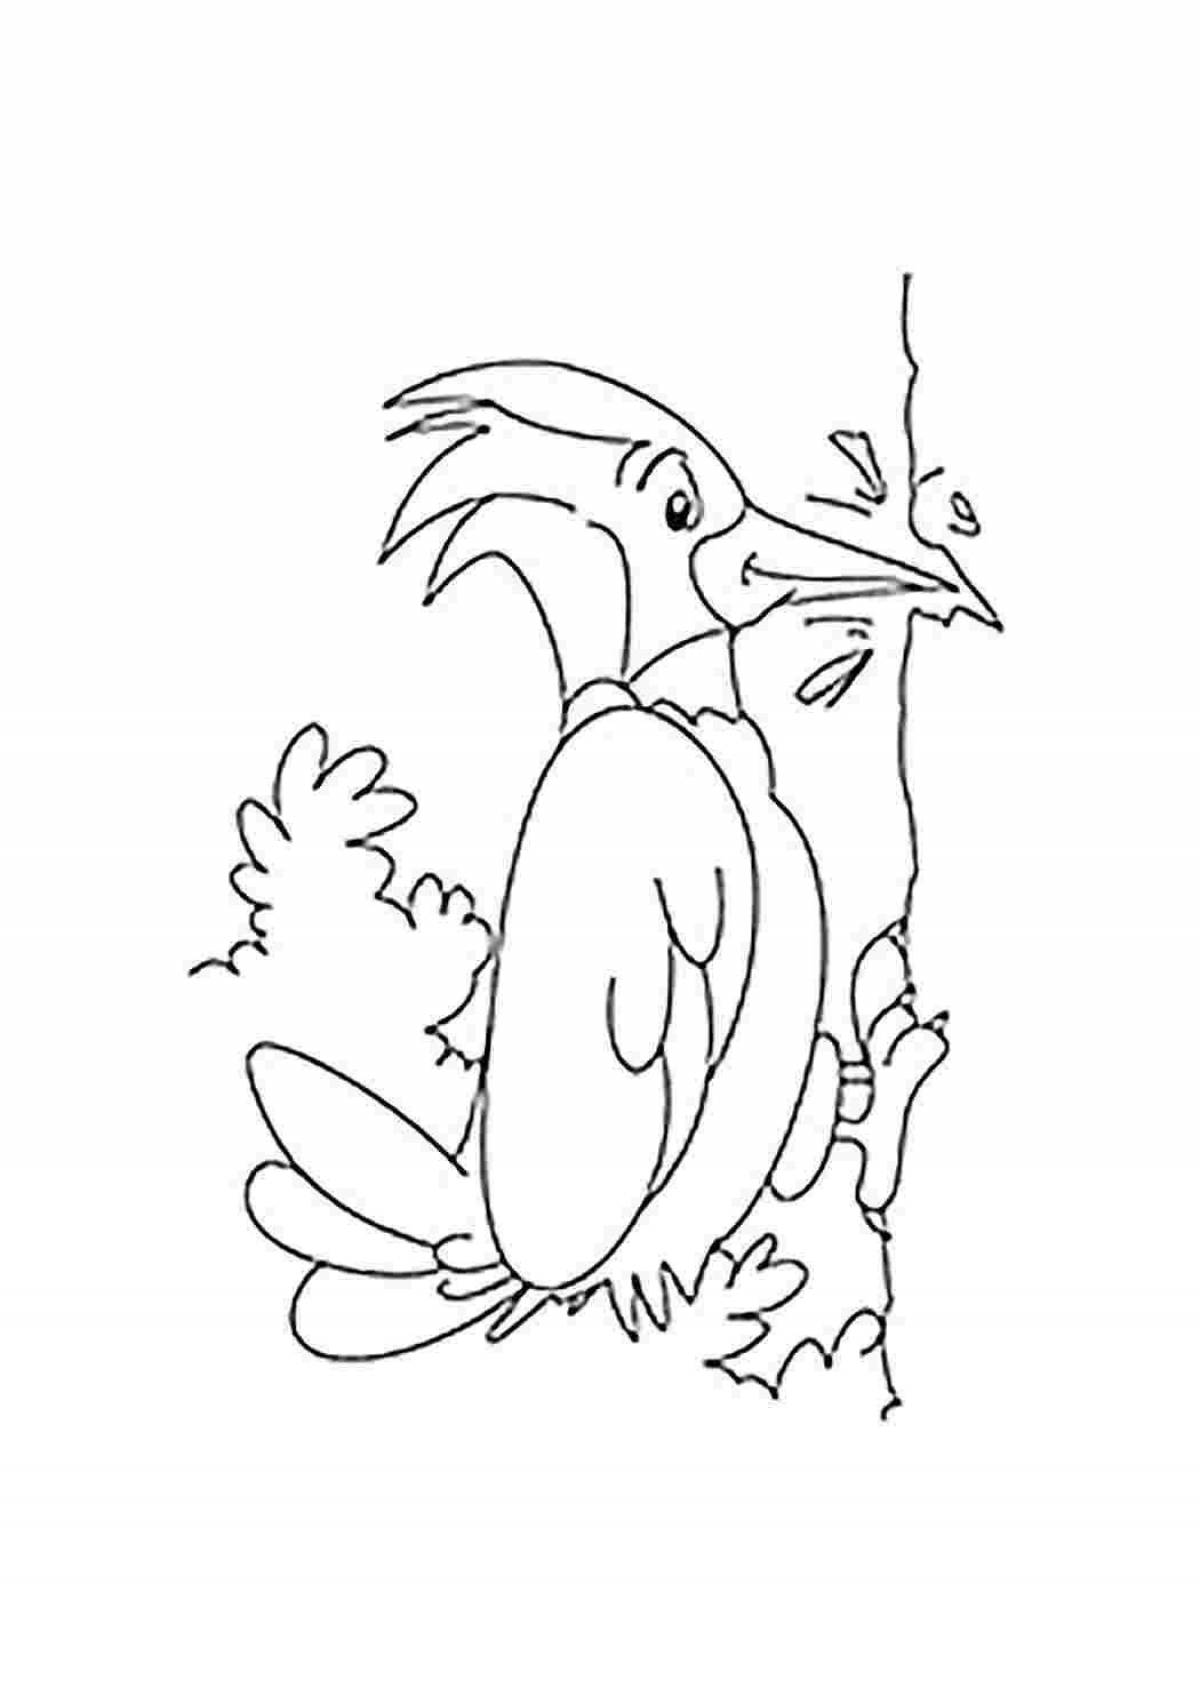 Sweet woodpecker coloring page